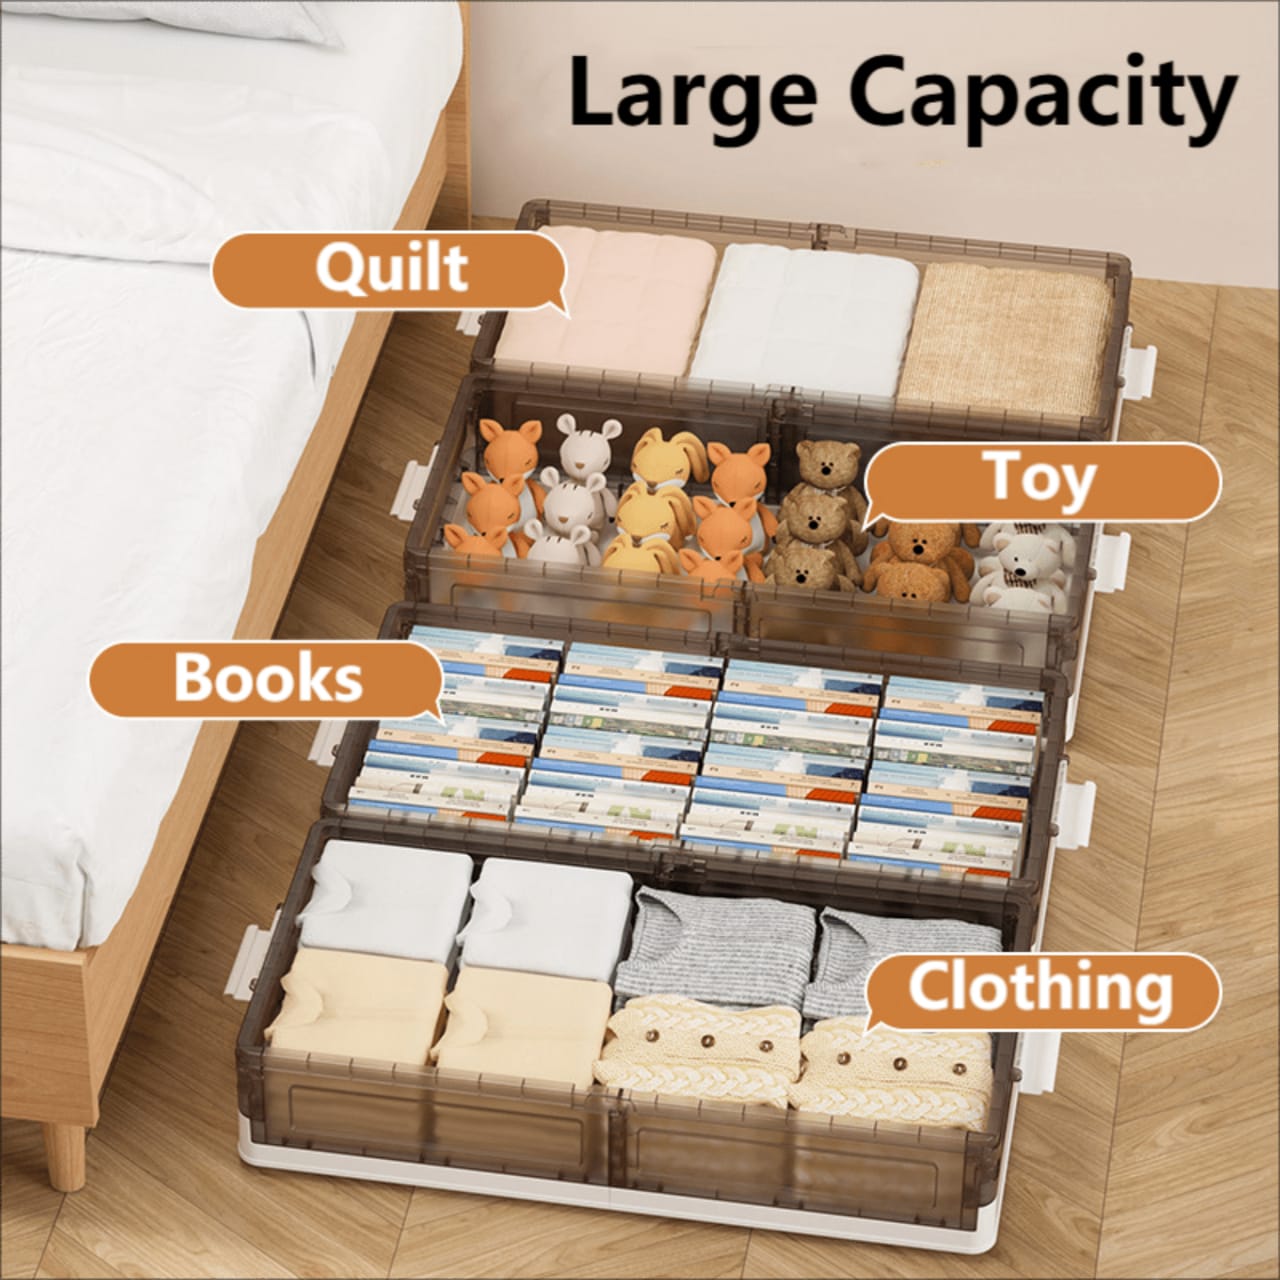 Foldable Under Bed Rolling Storage Organizer Container Organized With Different Items.